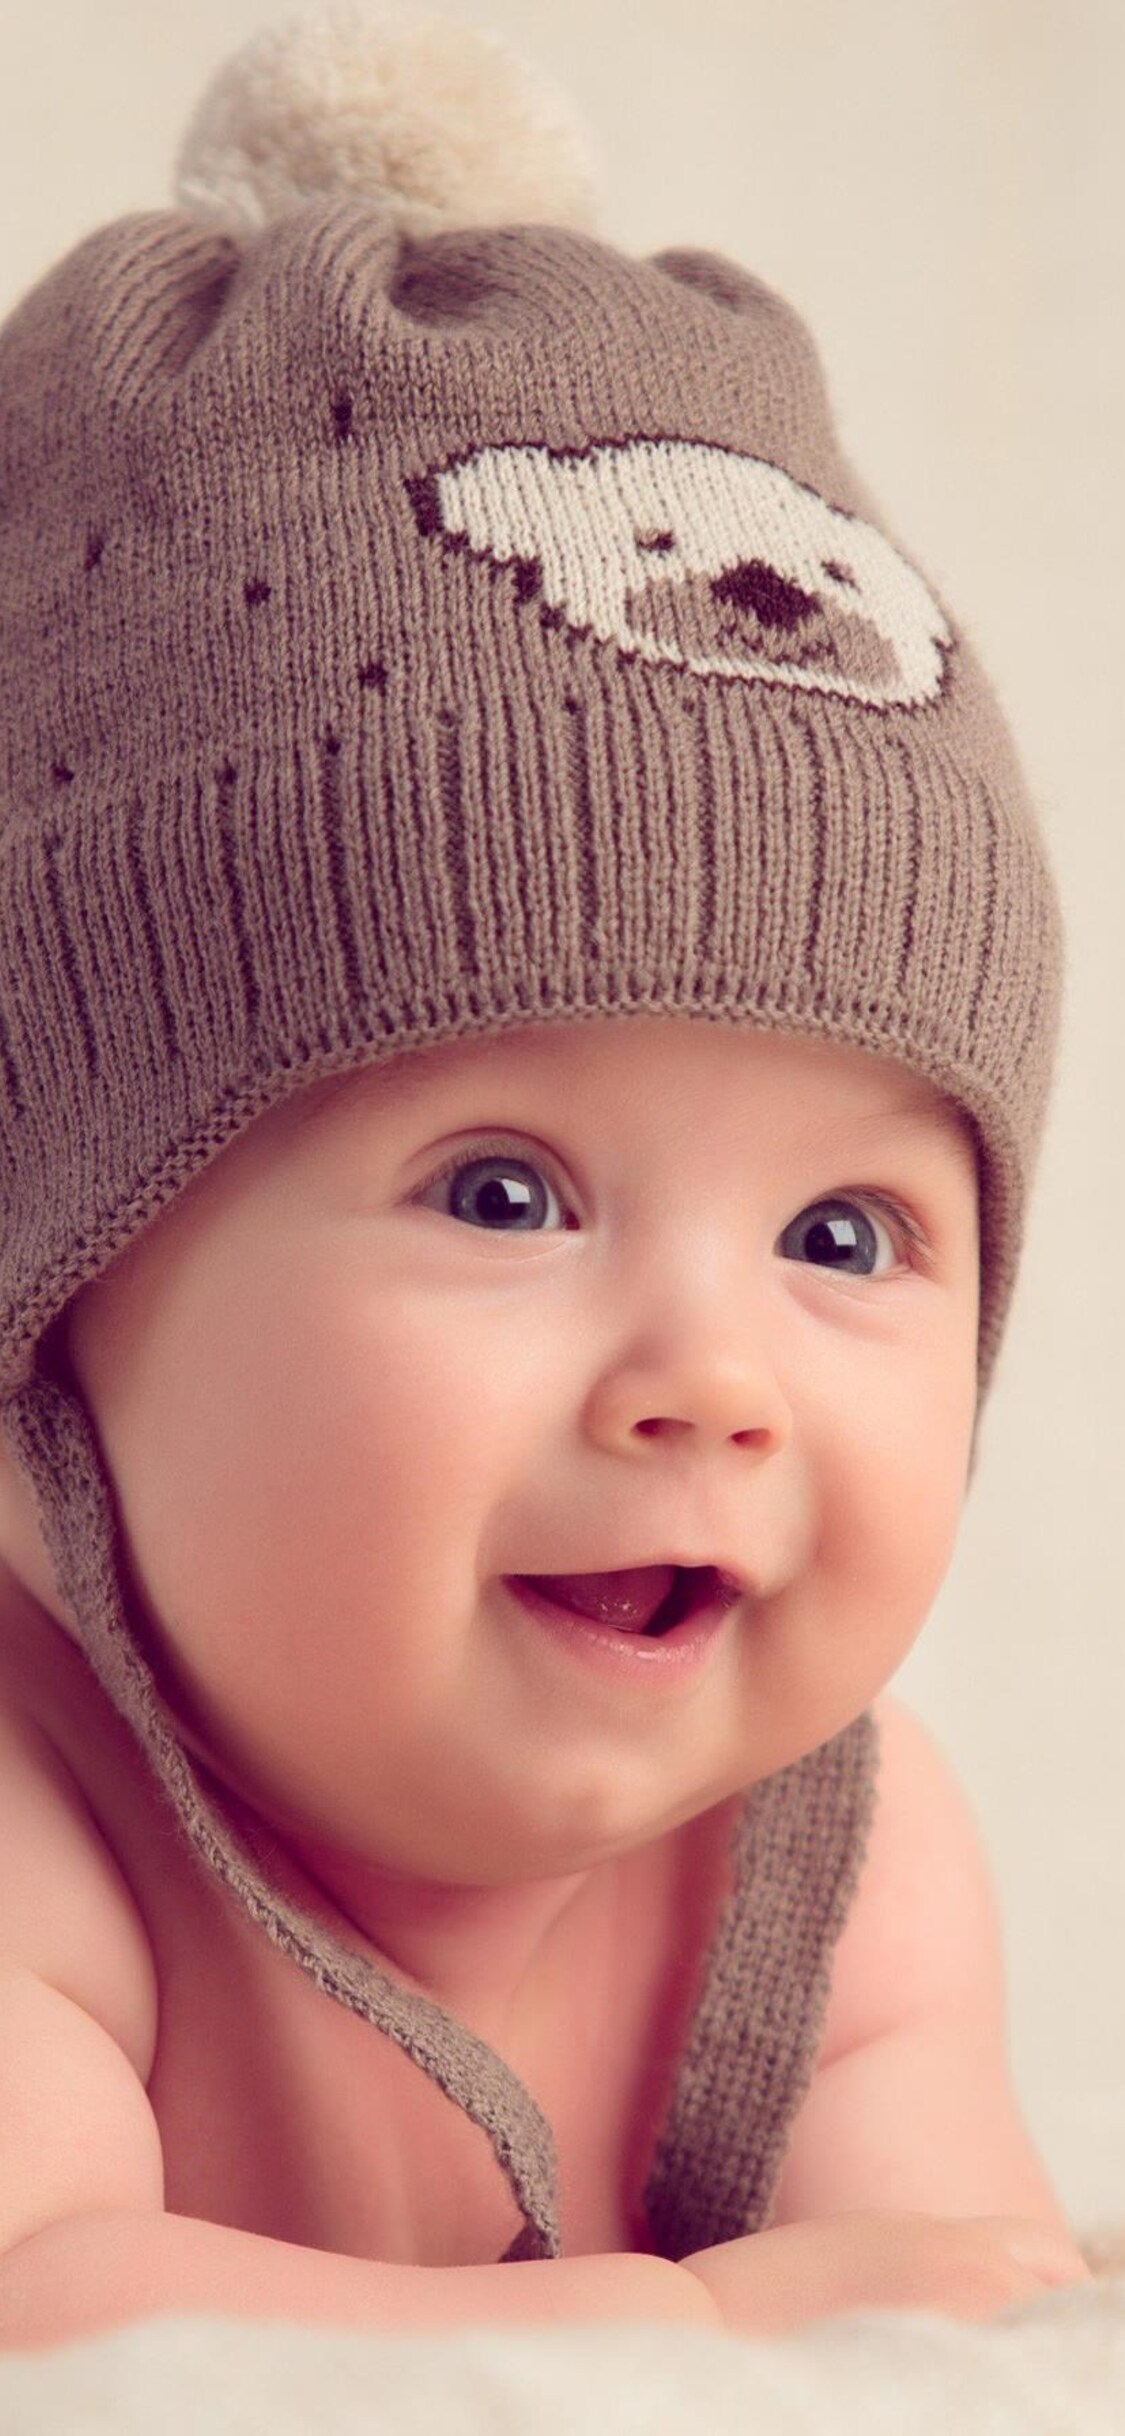 1125x2436 Smiling Baby Iphone XS,Iphone ...